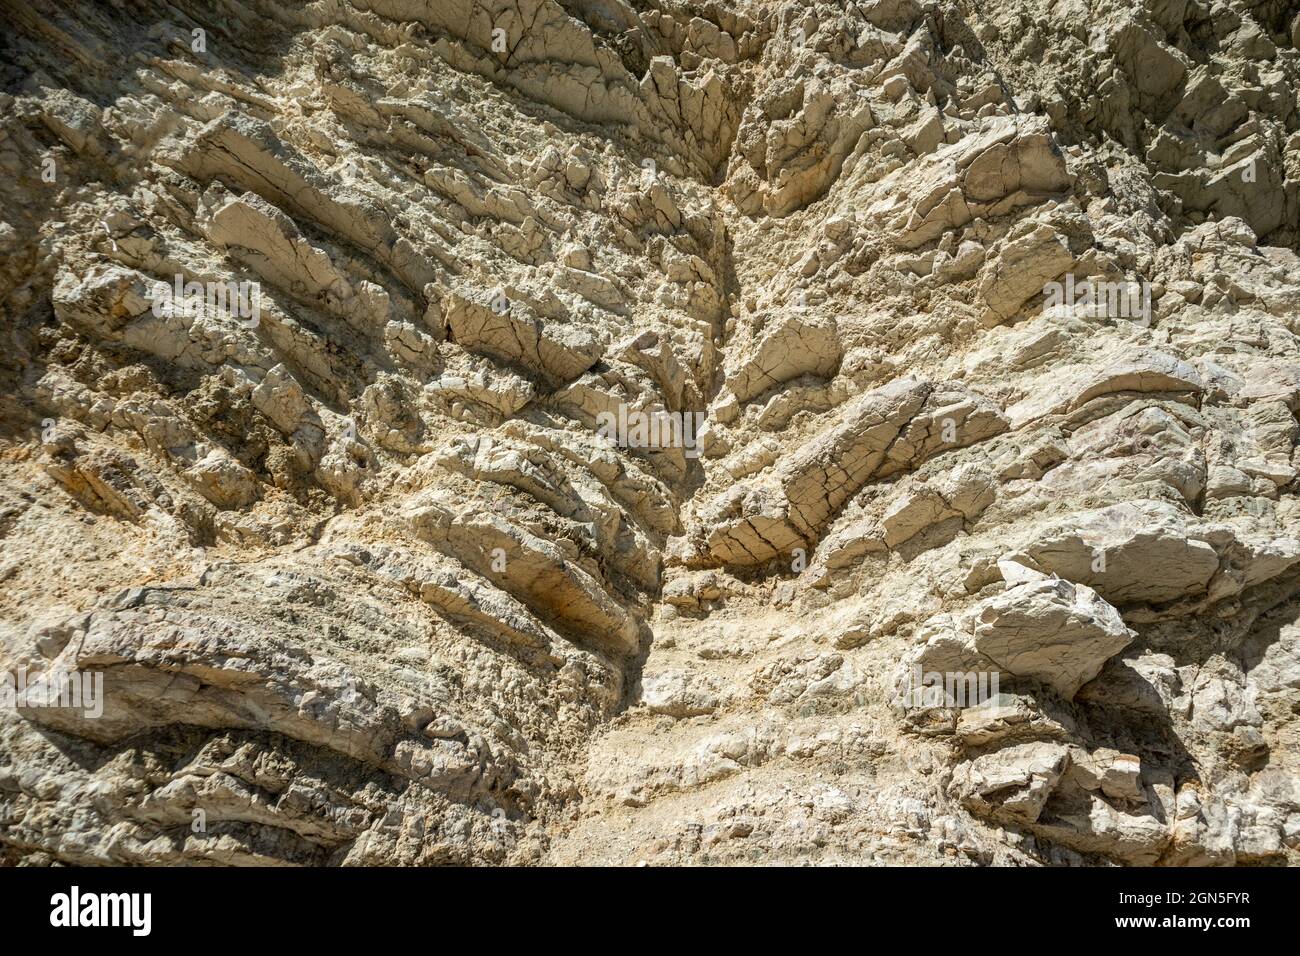 https://c8.alamy.com/comp/2GN5FYR/white-layered-rocks-texture-geology-close-up-cliff-on-coast-of-lefkada-island-in-greece-summer-wild-nature-material-surface-close-up-2GN5FYR.jpg